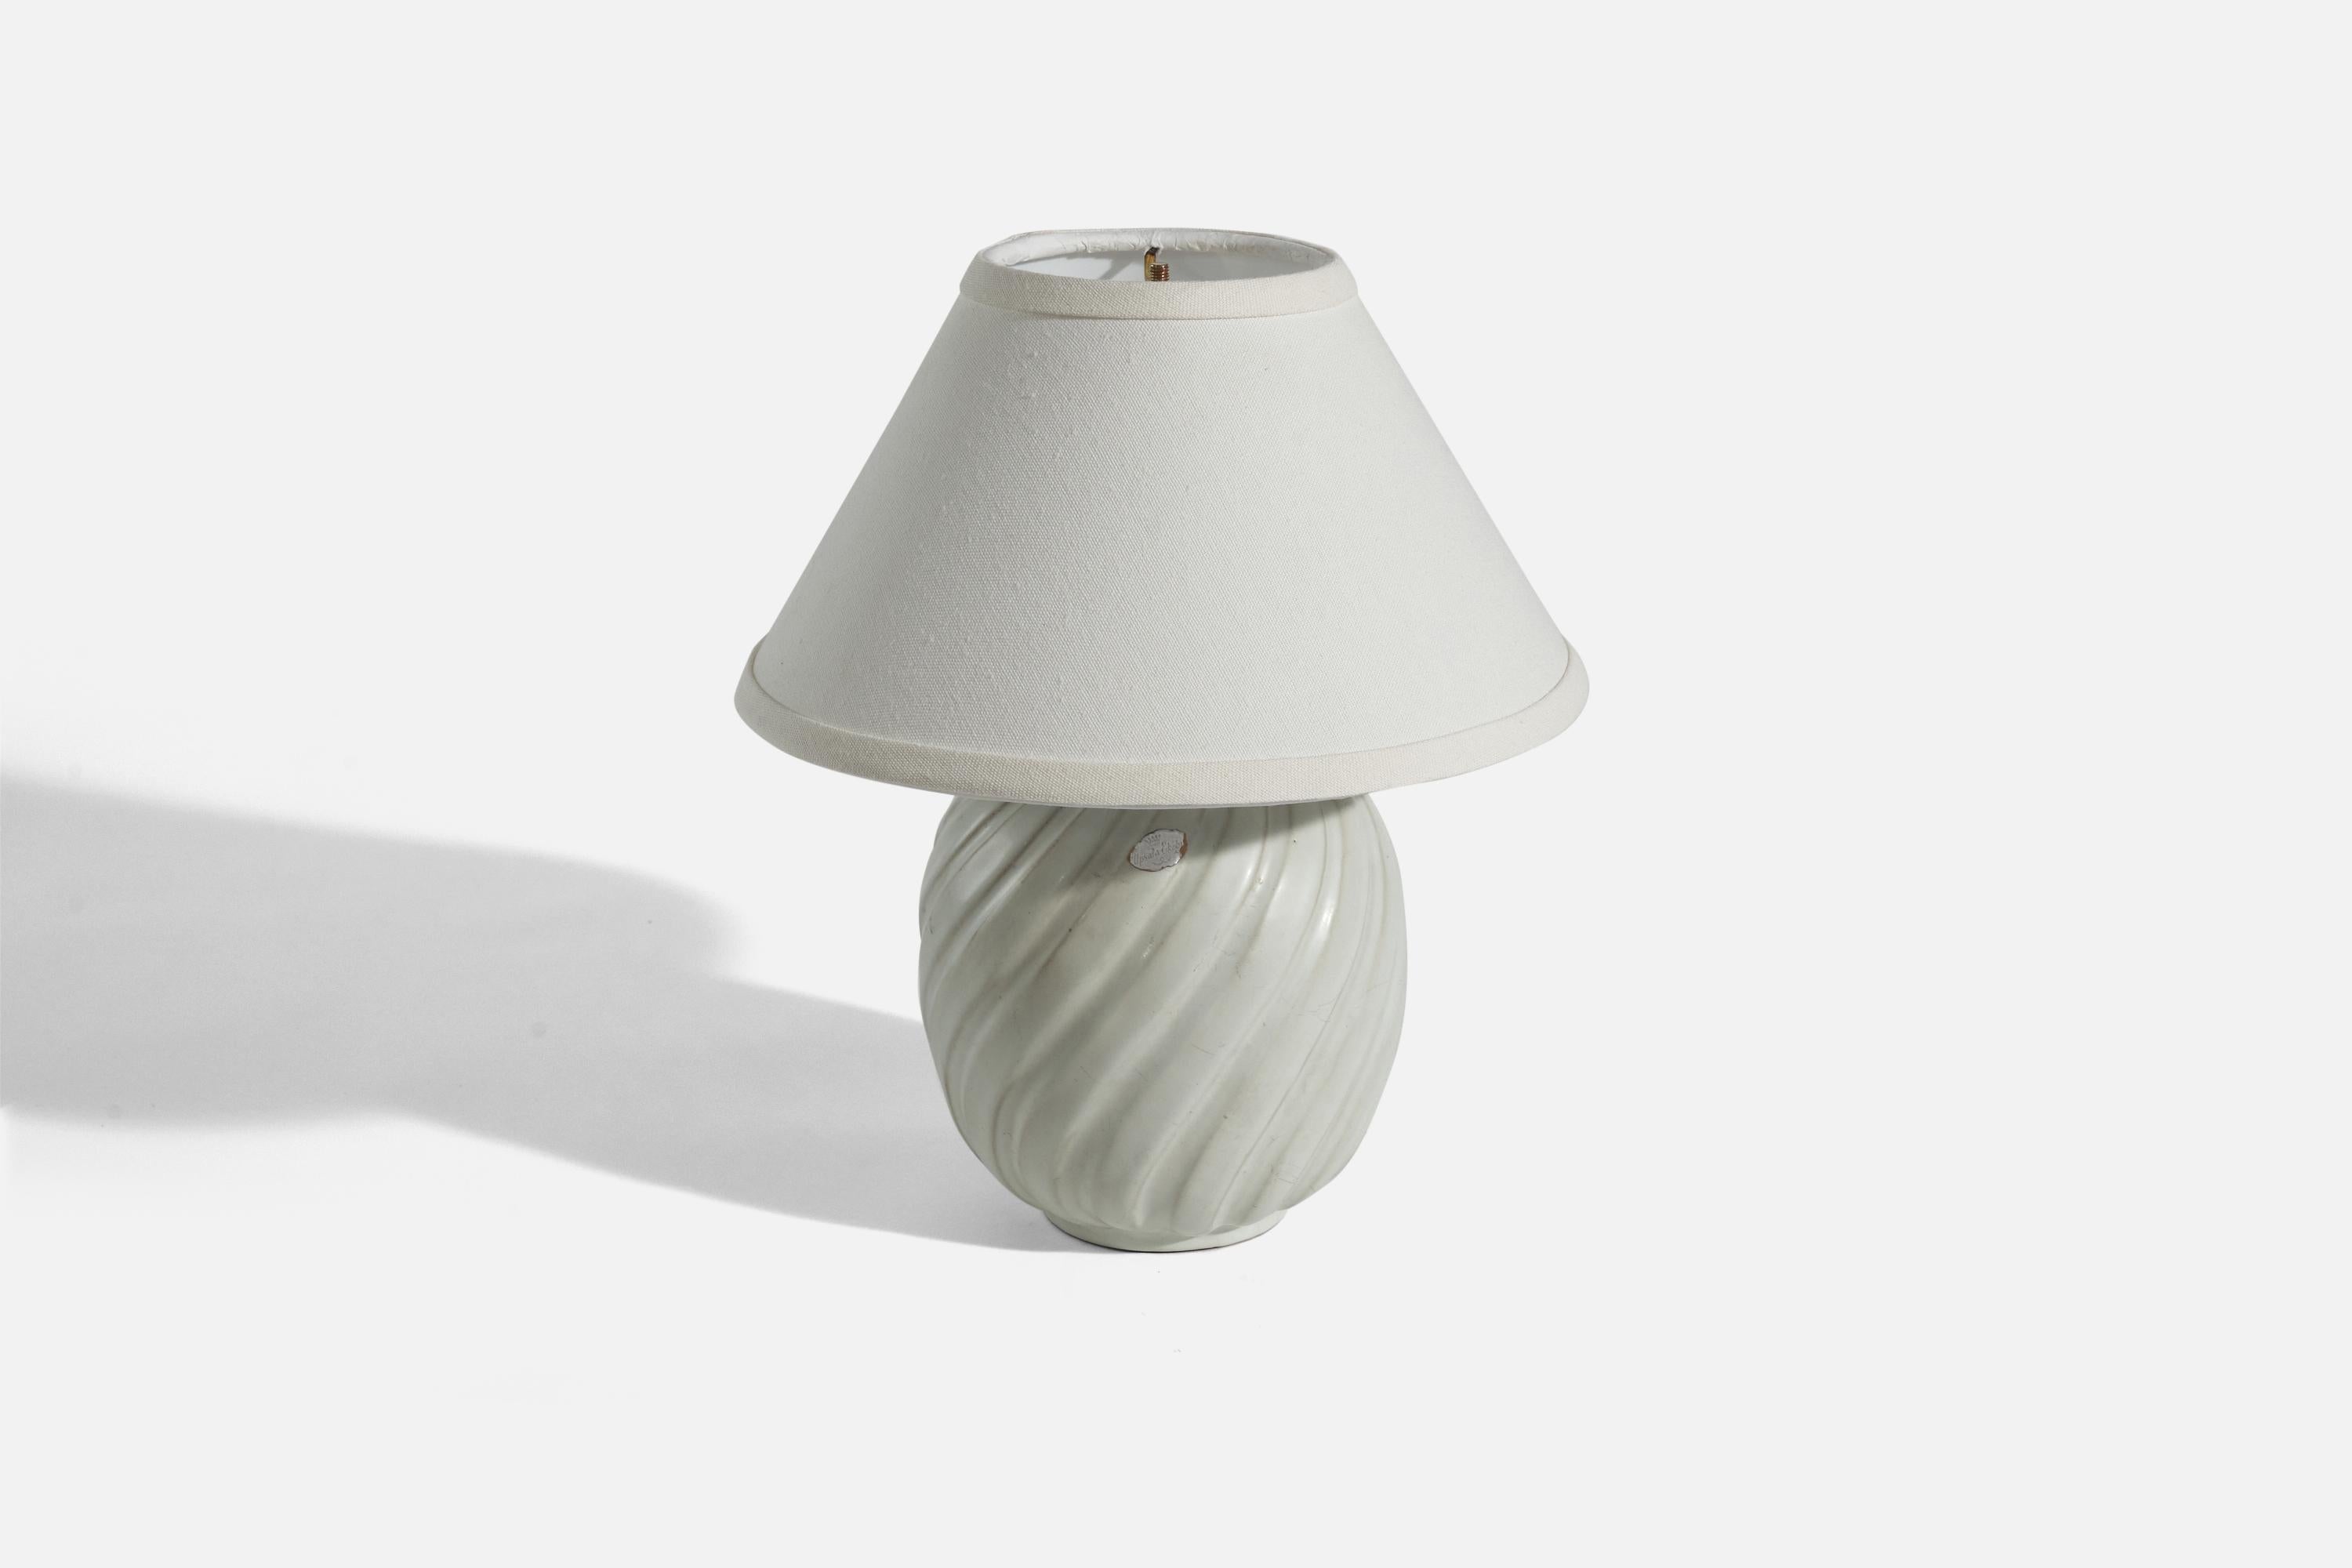 A white, glazed earthenware and brass table lamp designed and produced by Upsala-Ekeby, Sweden, 1940s.

Sold without lampshade. 
Dimensions of lamp (inches) : 10.18 x 6 x 6 (height x width x depth)
Dimensions of shade (inches) : 4.25 x 10.25 x 6